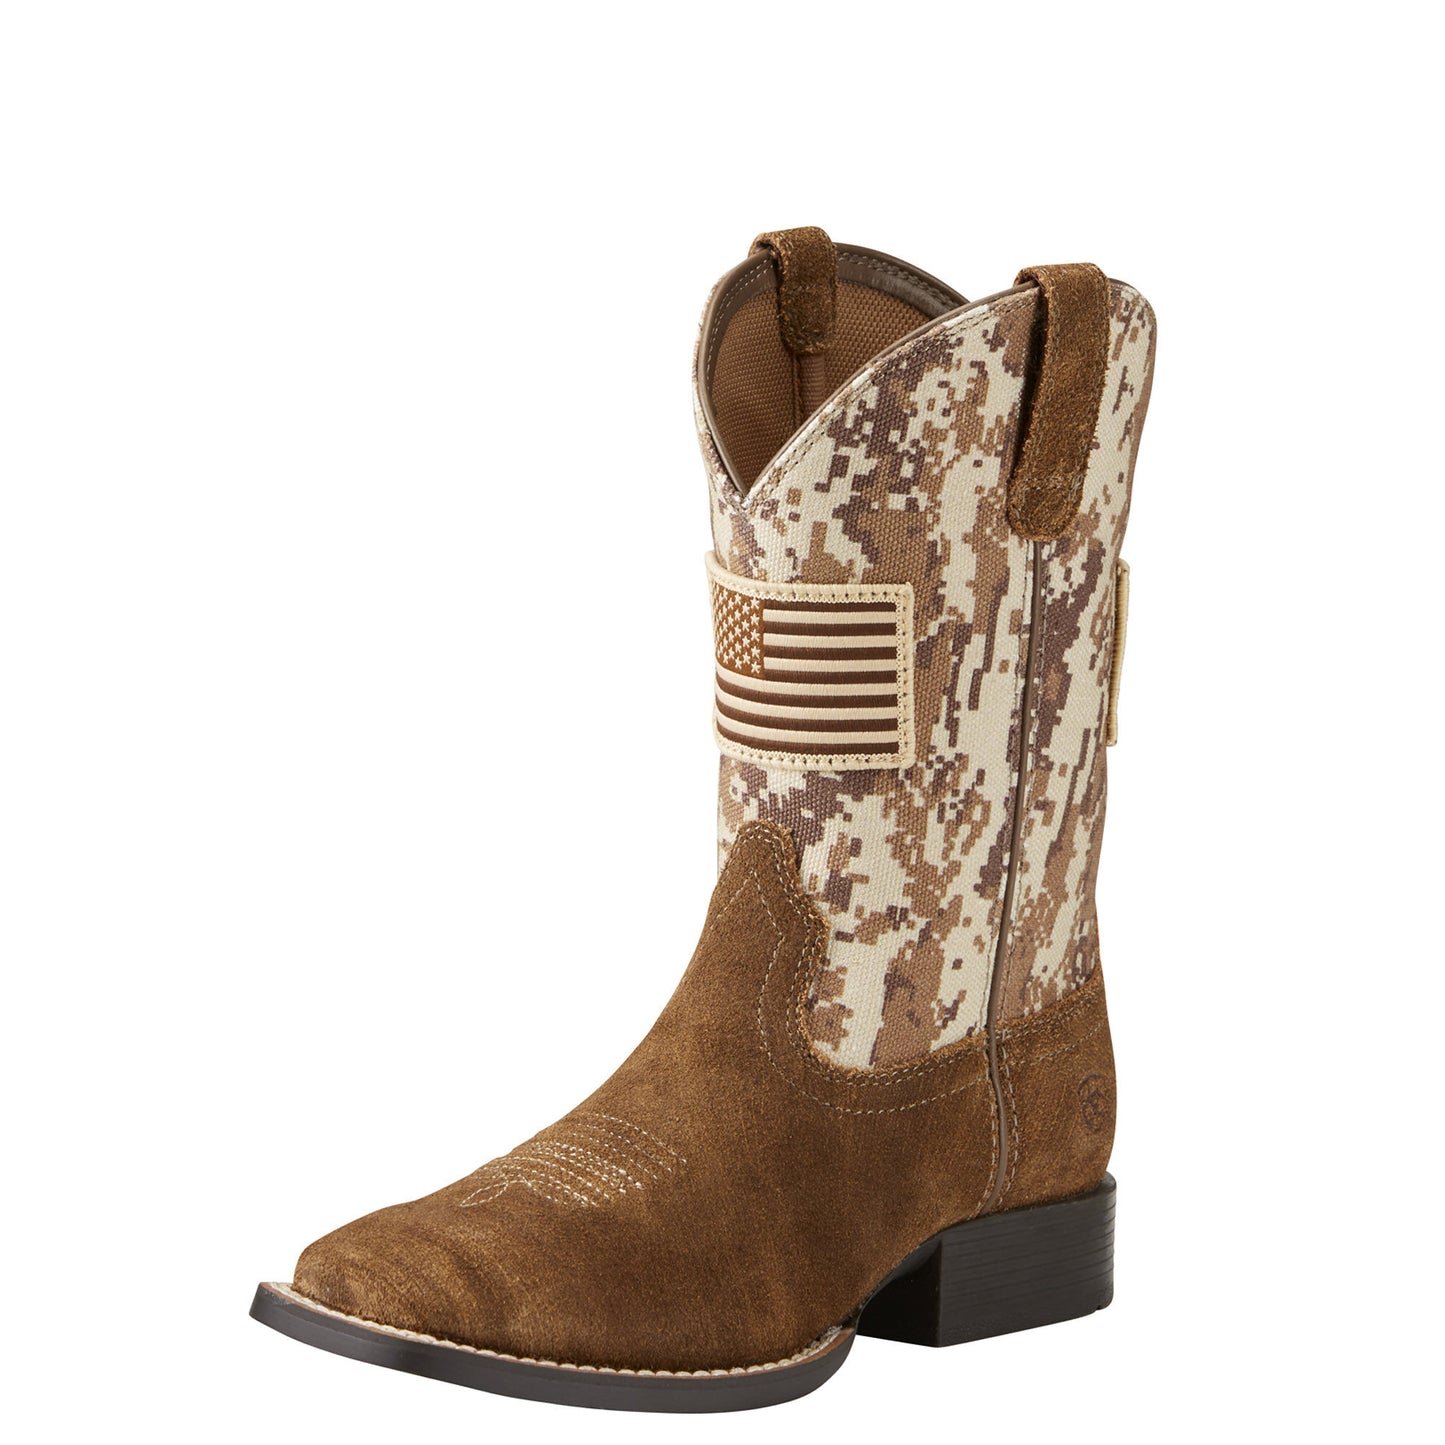 Ariat Kids Patriot Boot - Antique Mocha/Sand Camo Print - French's Boots